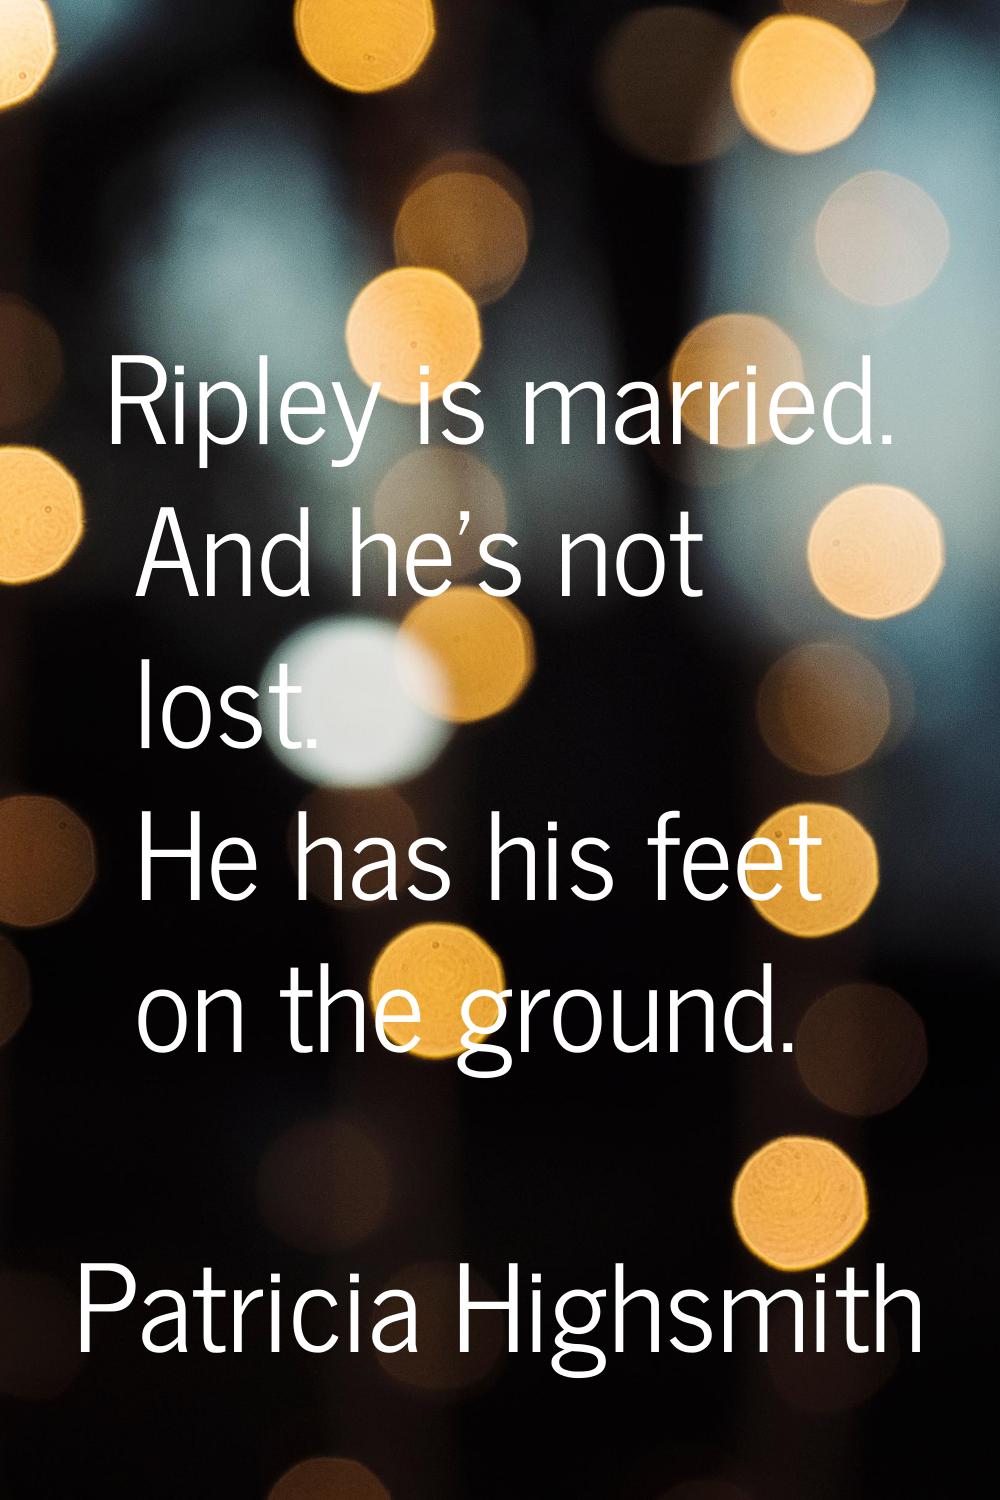 Ripley is married. And he's not lost. He has his feet on the ground.